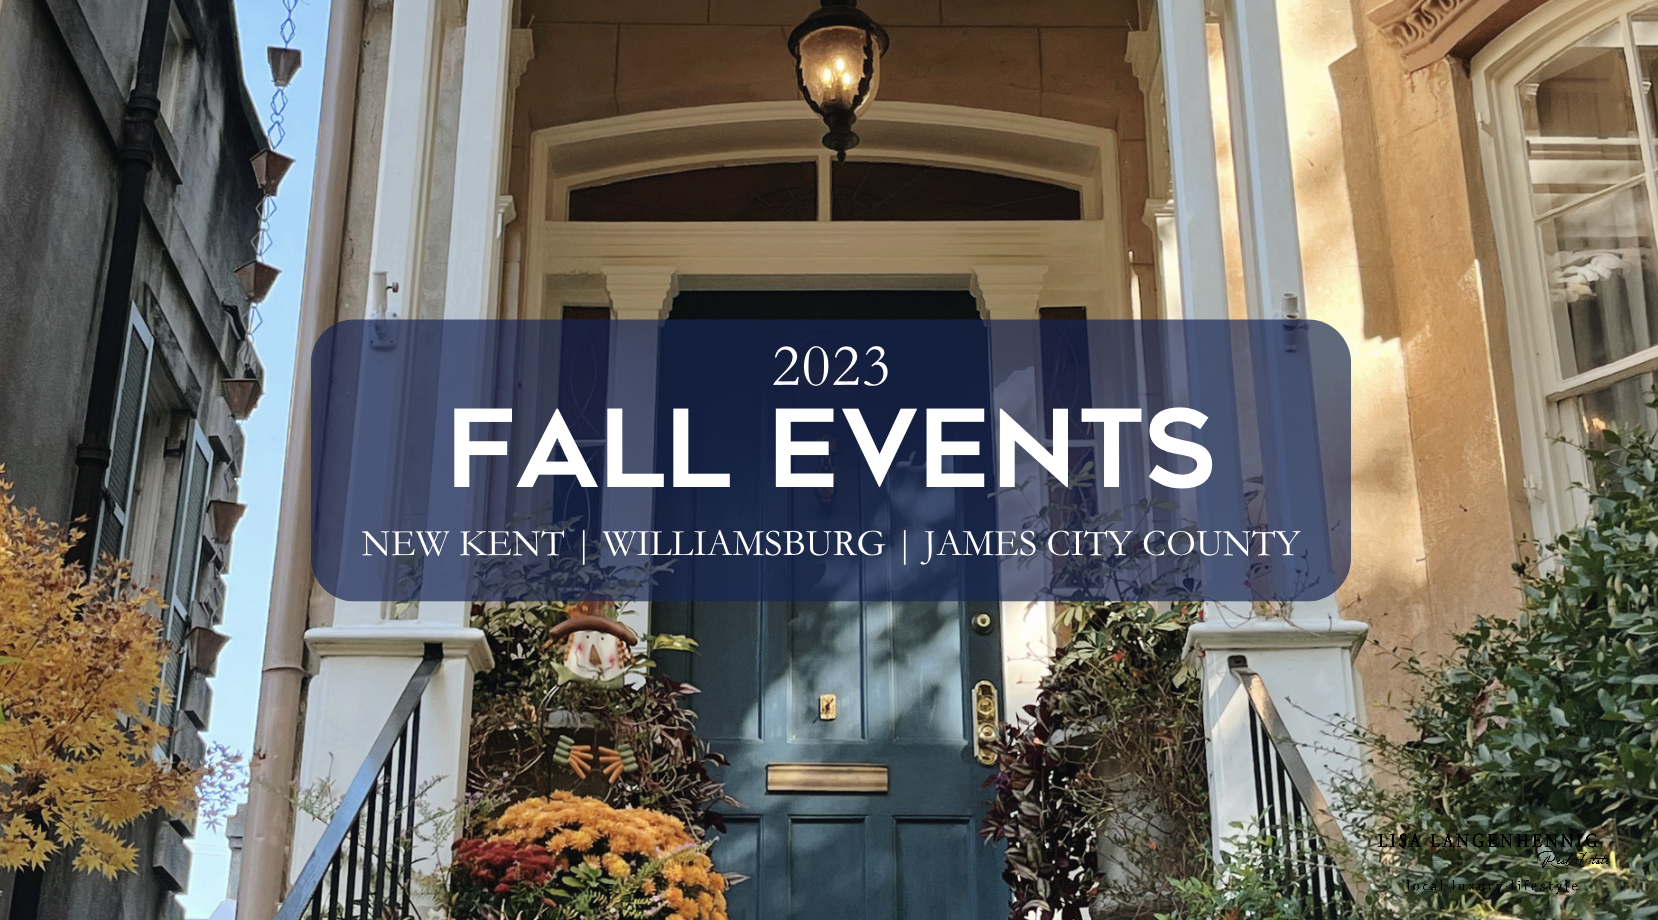 Things to do in Williamsburg and New Kent this Fall